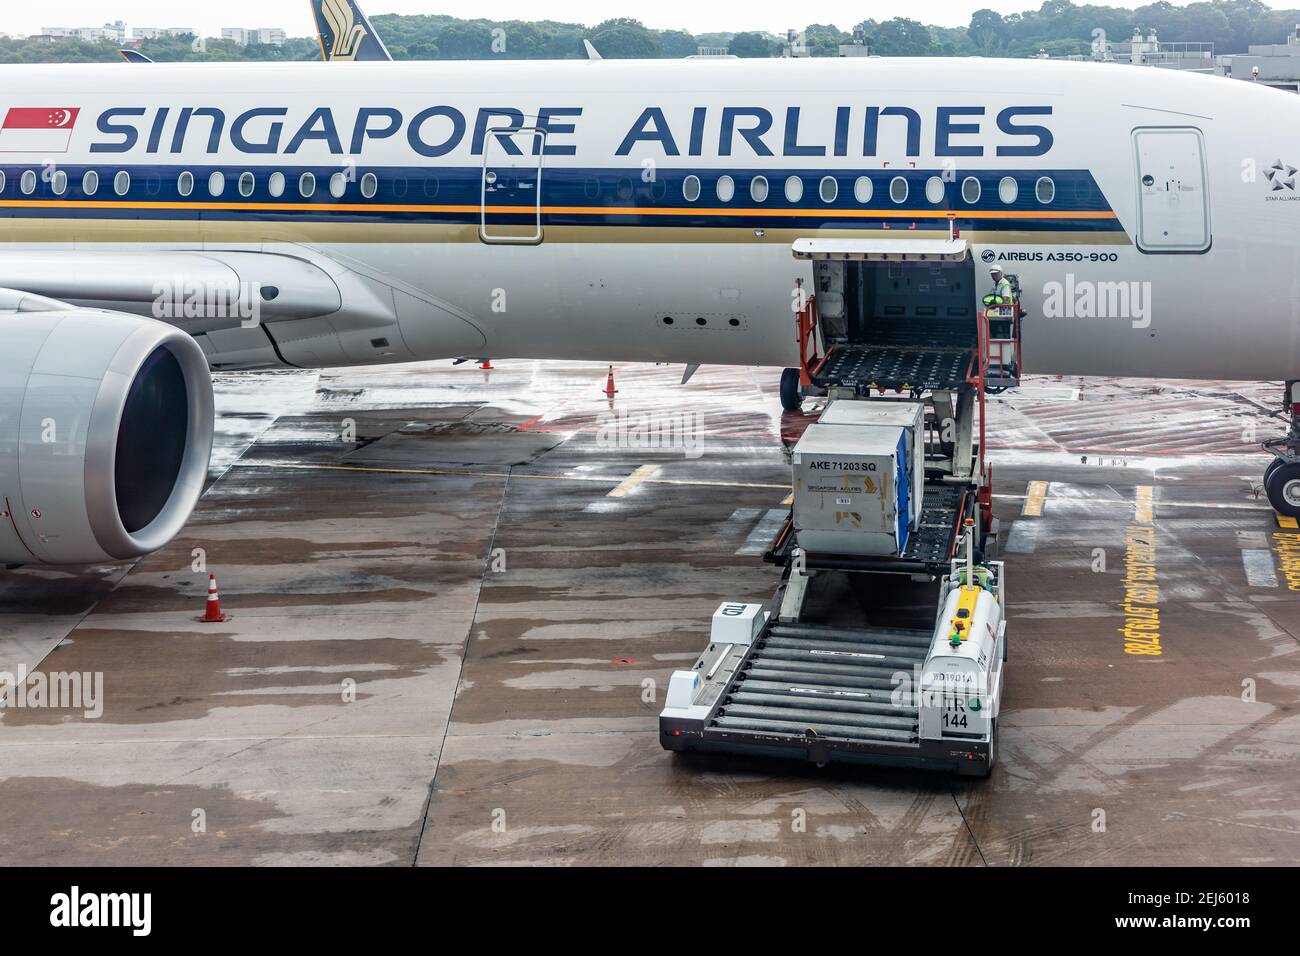 A ULD loader lifting a unit load device (ULD) from apron dollies to an aircrafts cargo bay of a Singapore Airlines machine at Changi Airport Singapore Stock Photo